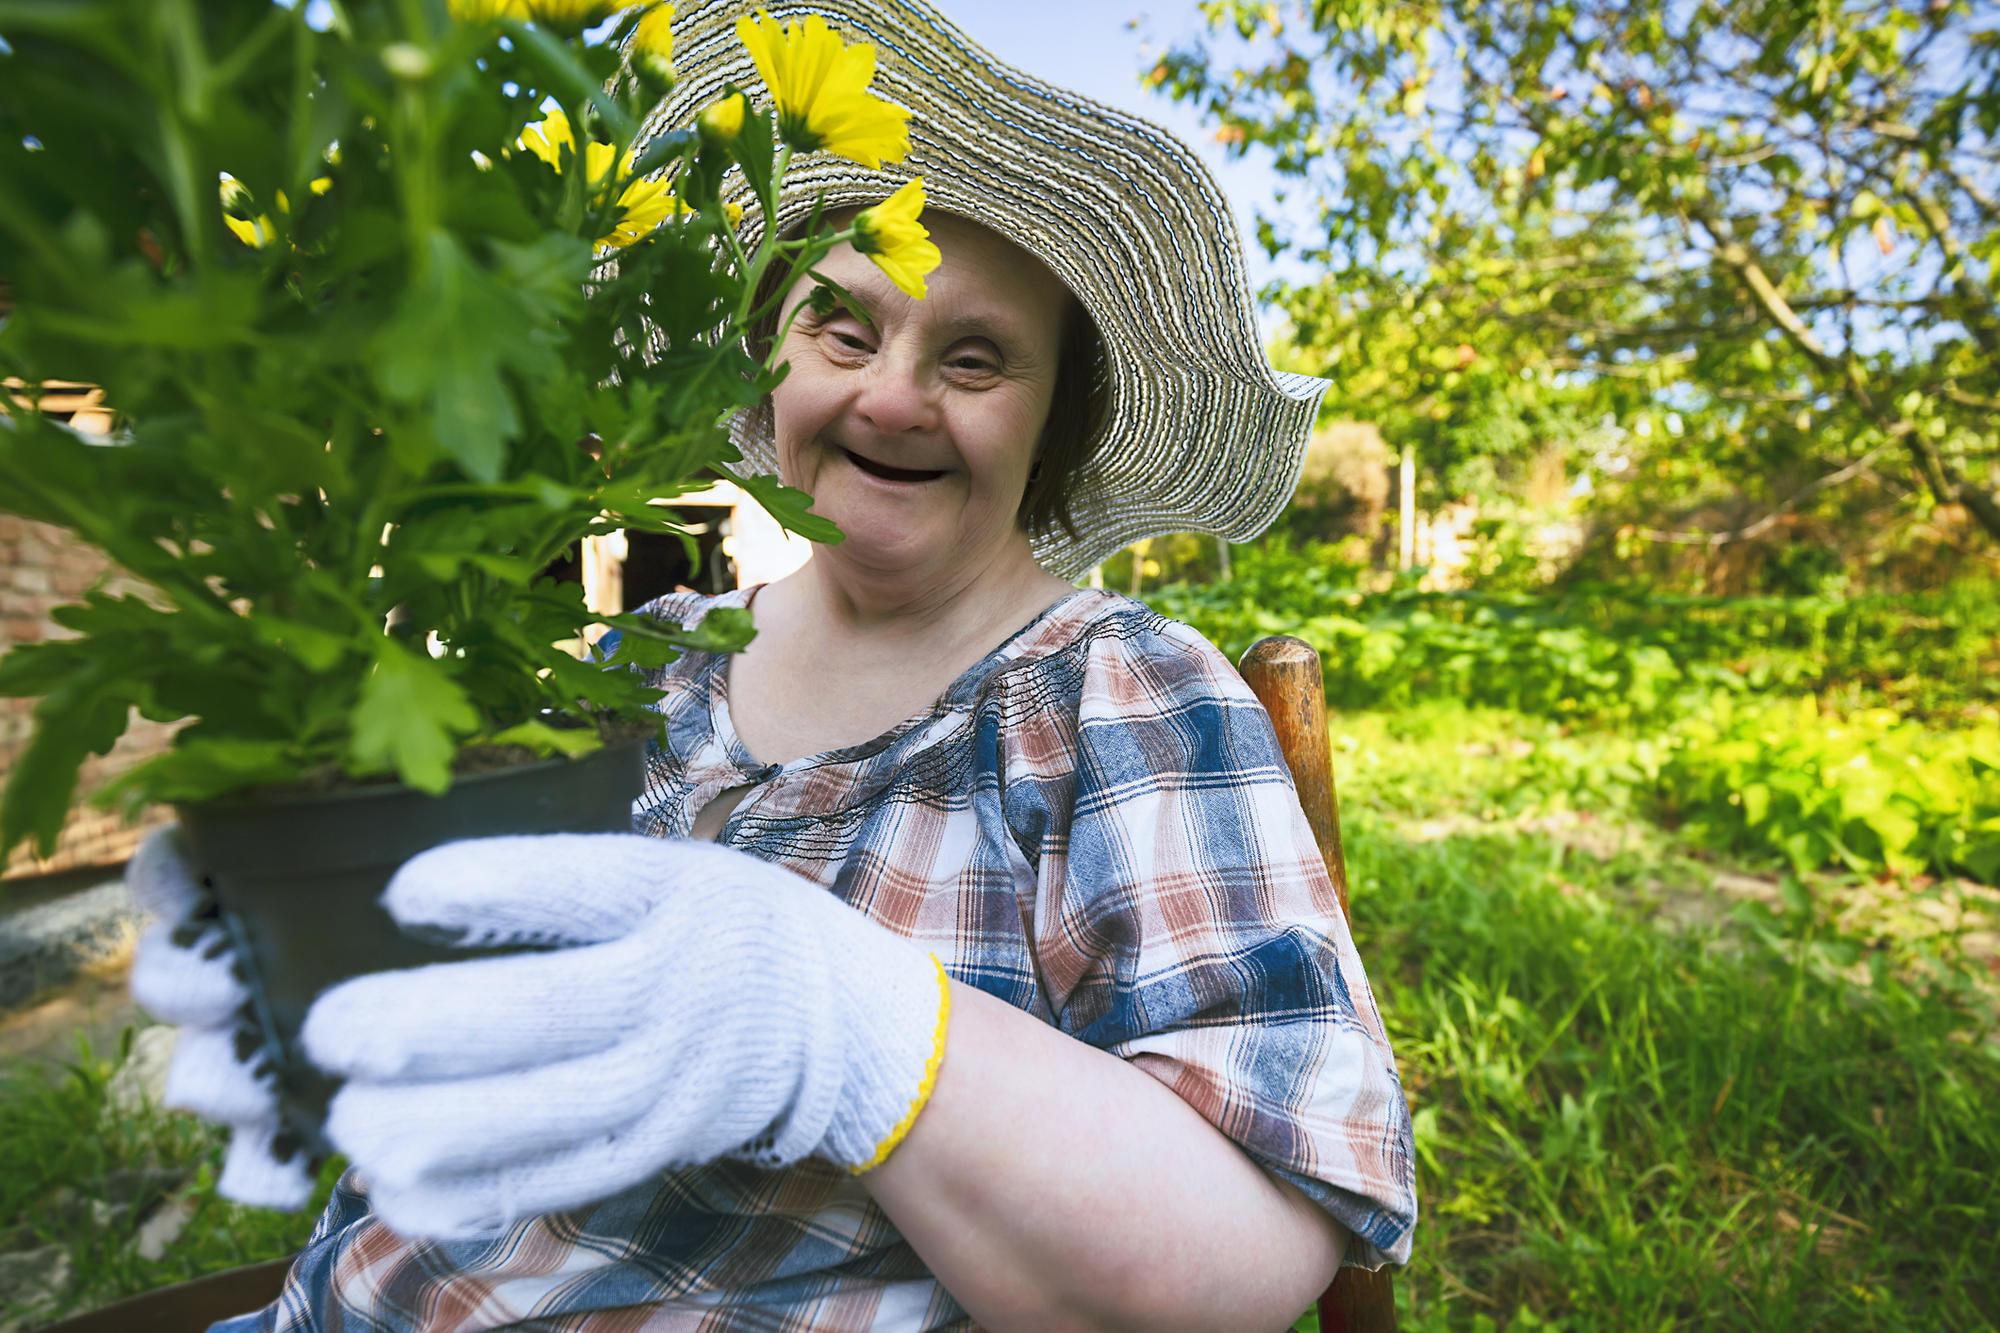 A woman with Down Syndrome plants a flower